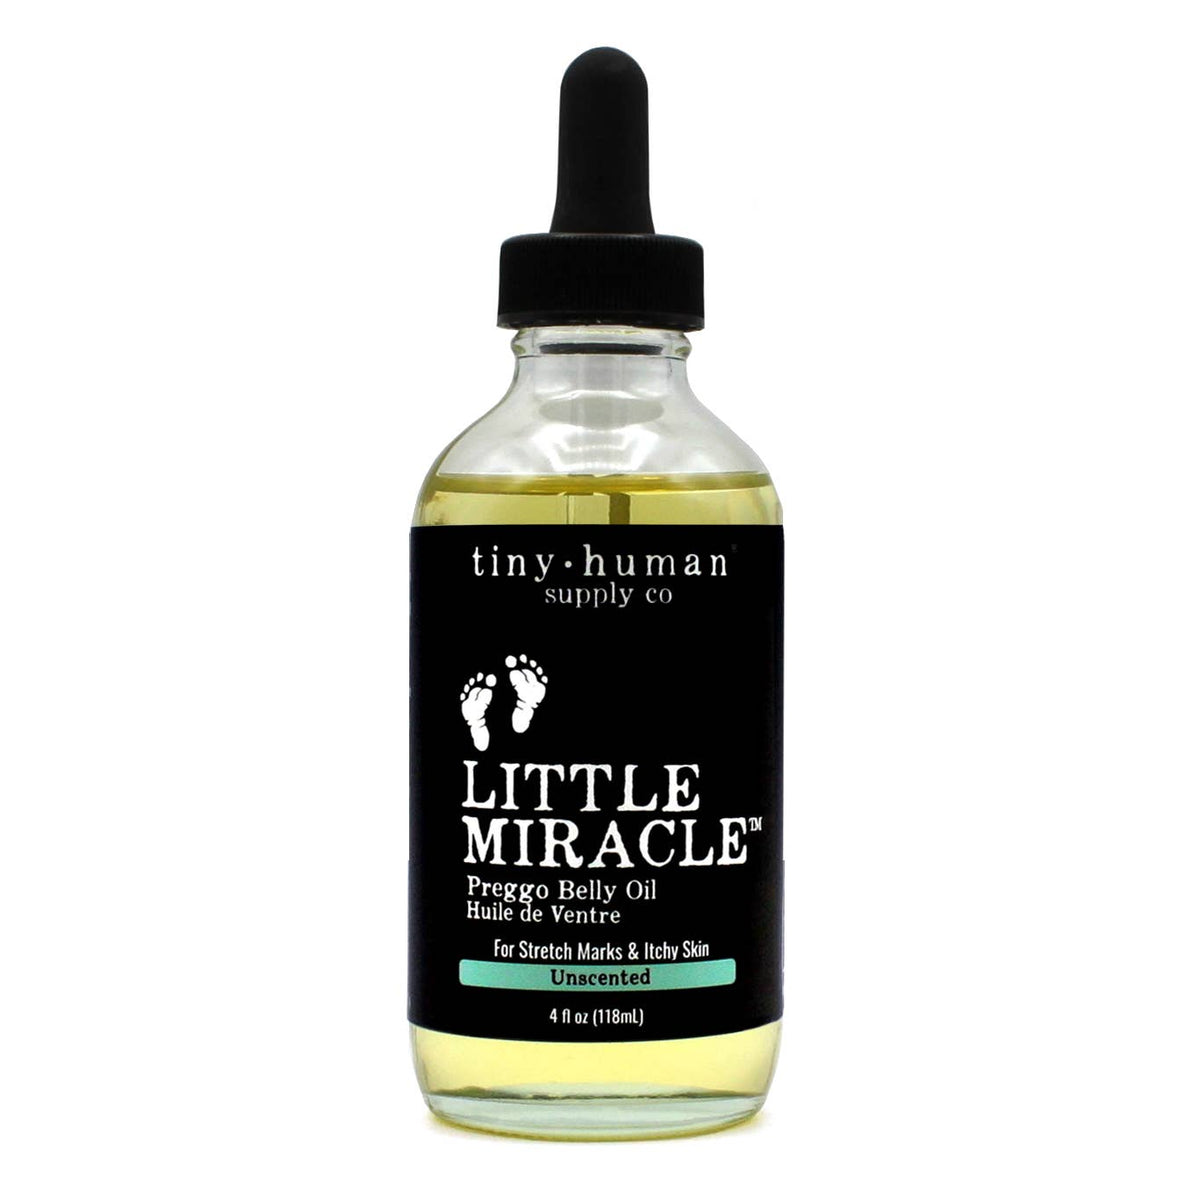 Little Miracle™ Belly Oil - Tiny Human Supply Co